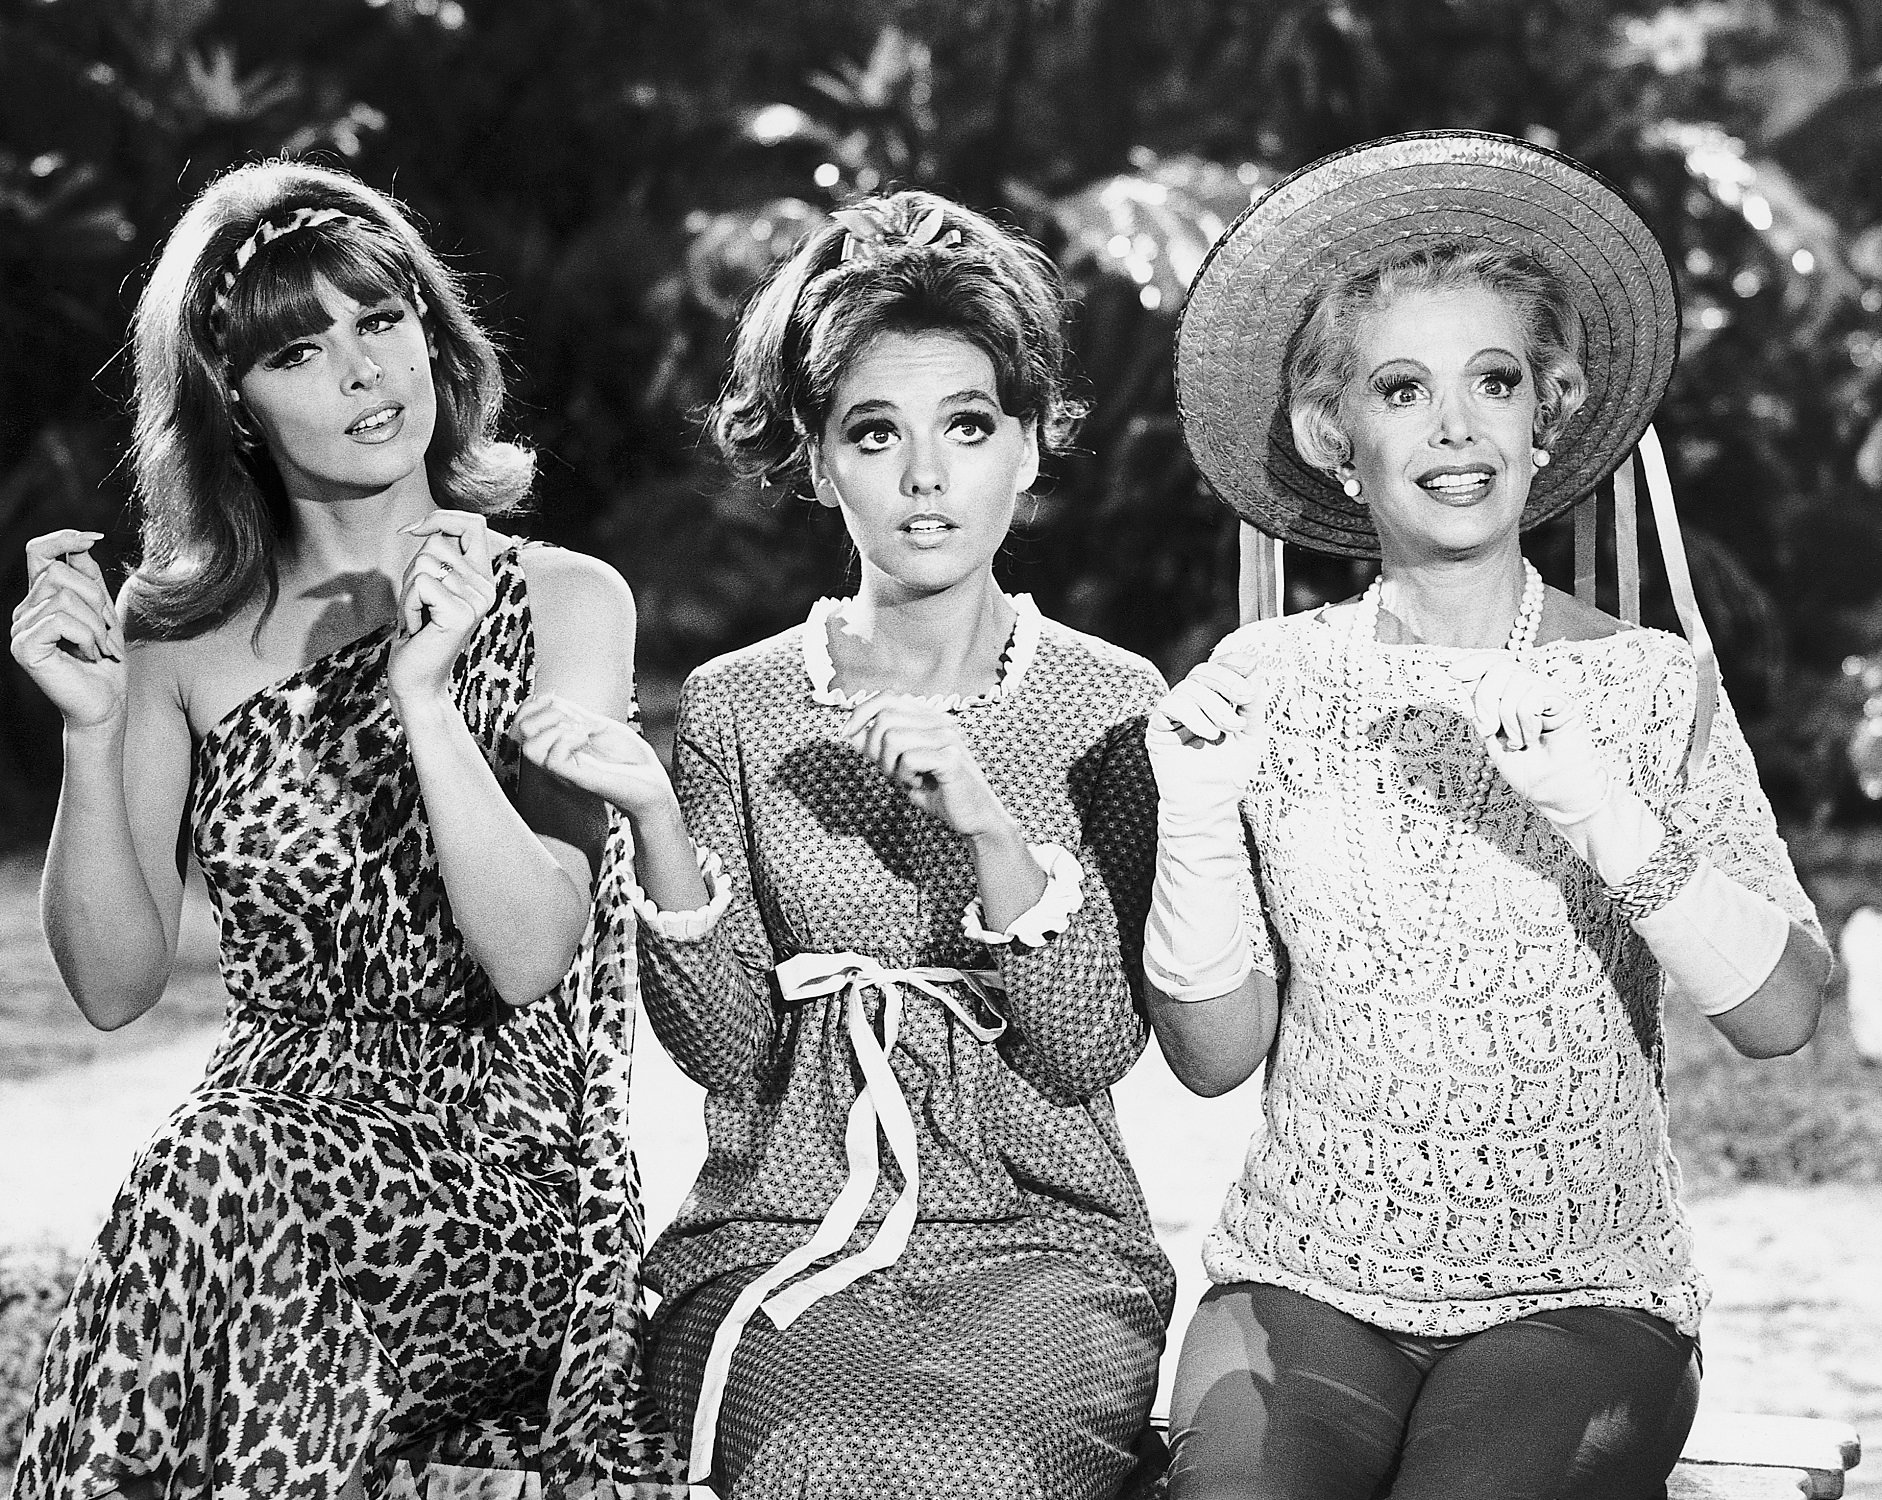 Ginger (Tina Louise), Mary Ann (Dawn Wells), and Mrs. Howell (Natalie Schaefer) in 'Gilligan's Island'